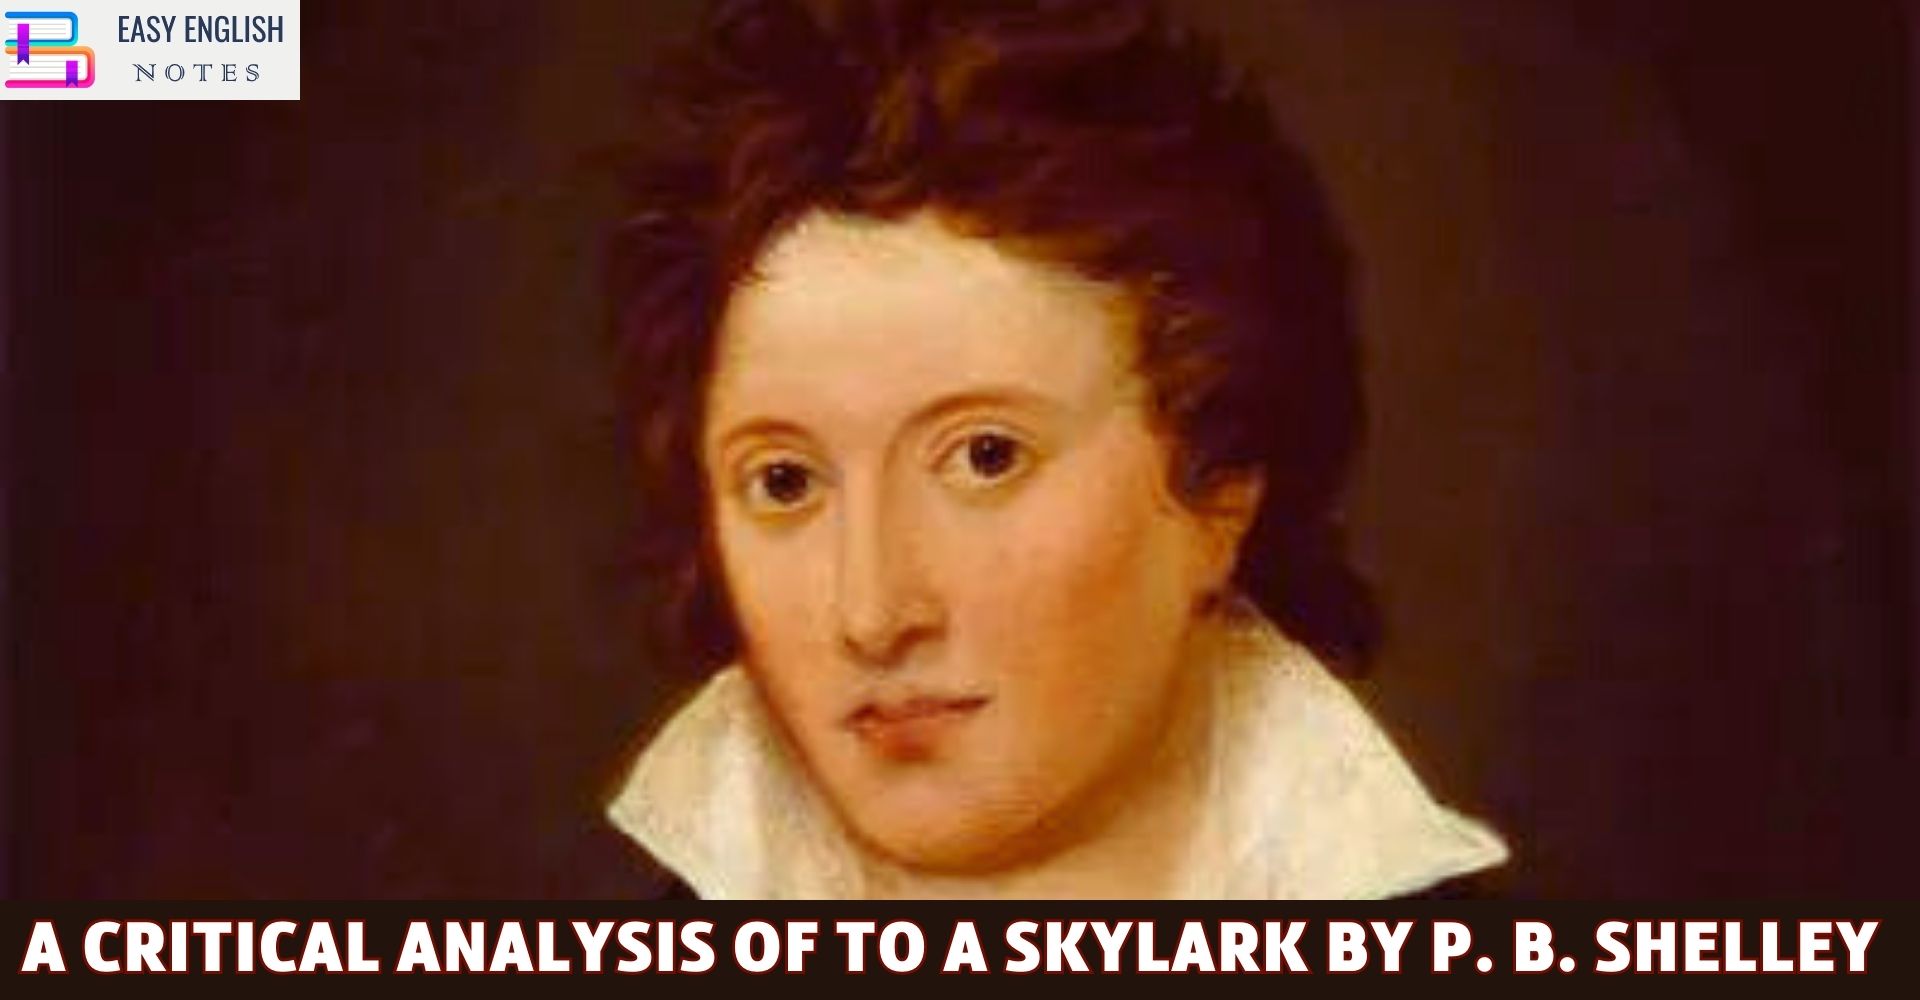 A Critical Analysis Of To A Skylark By P. B. Shelley